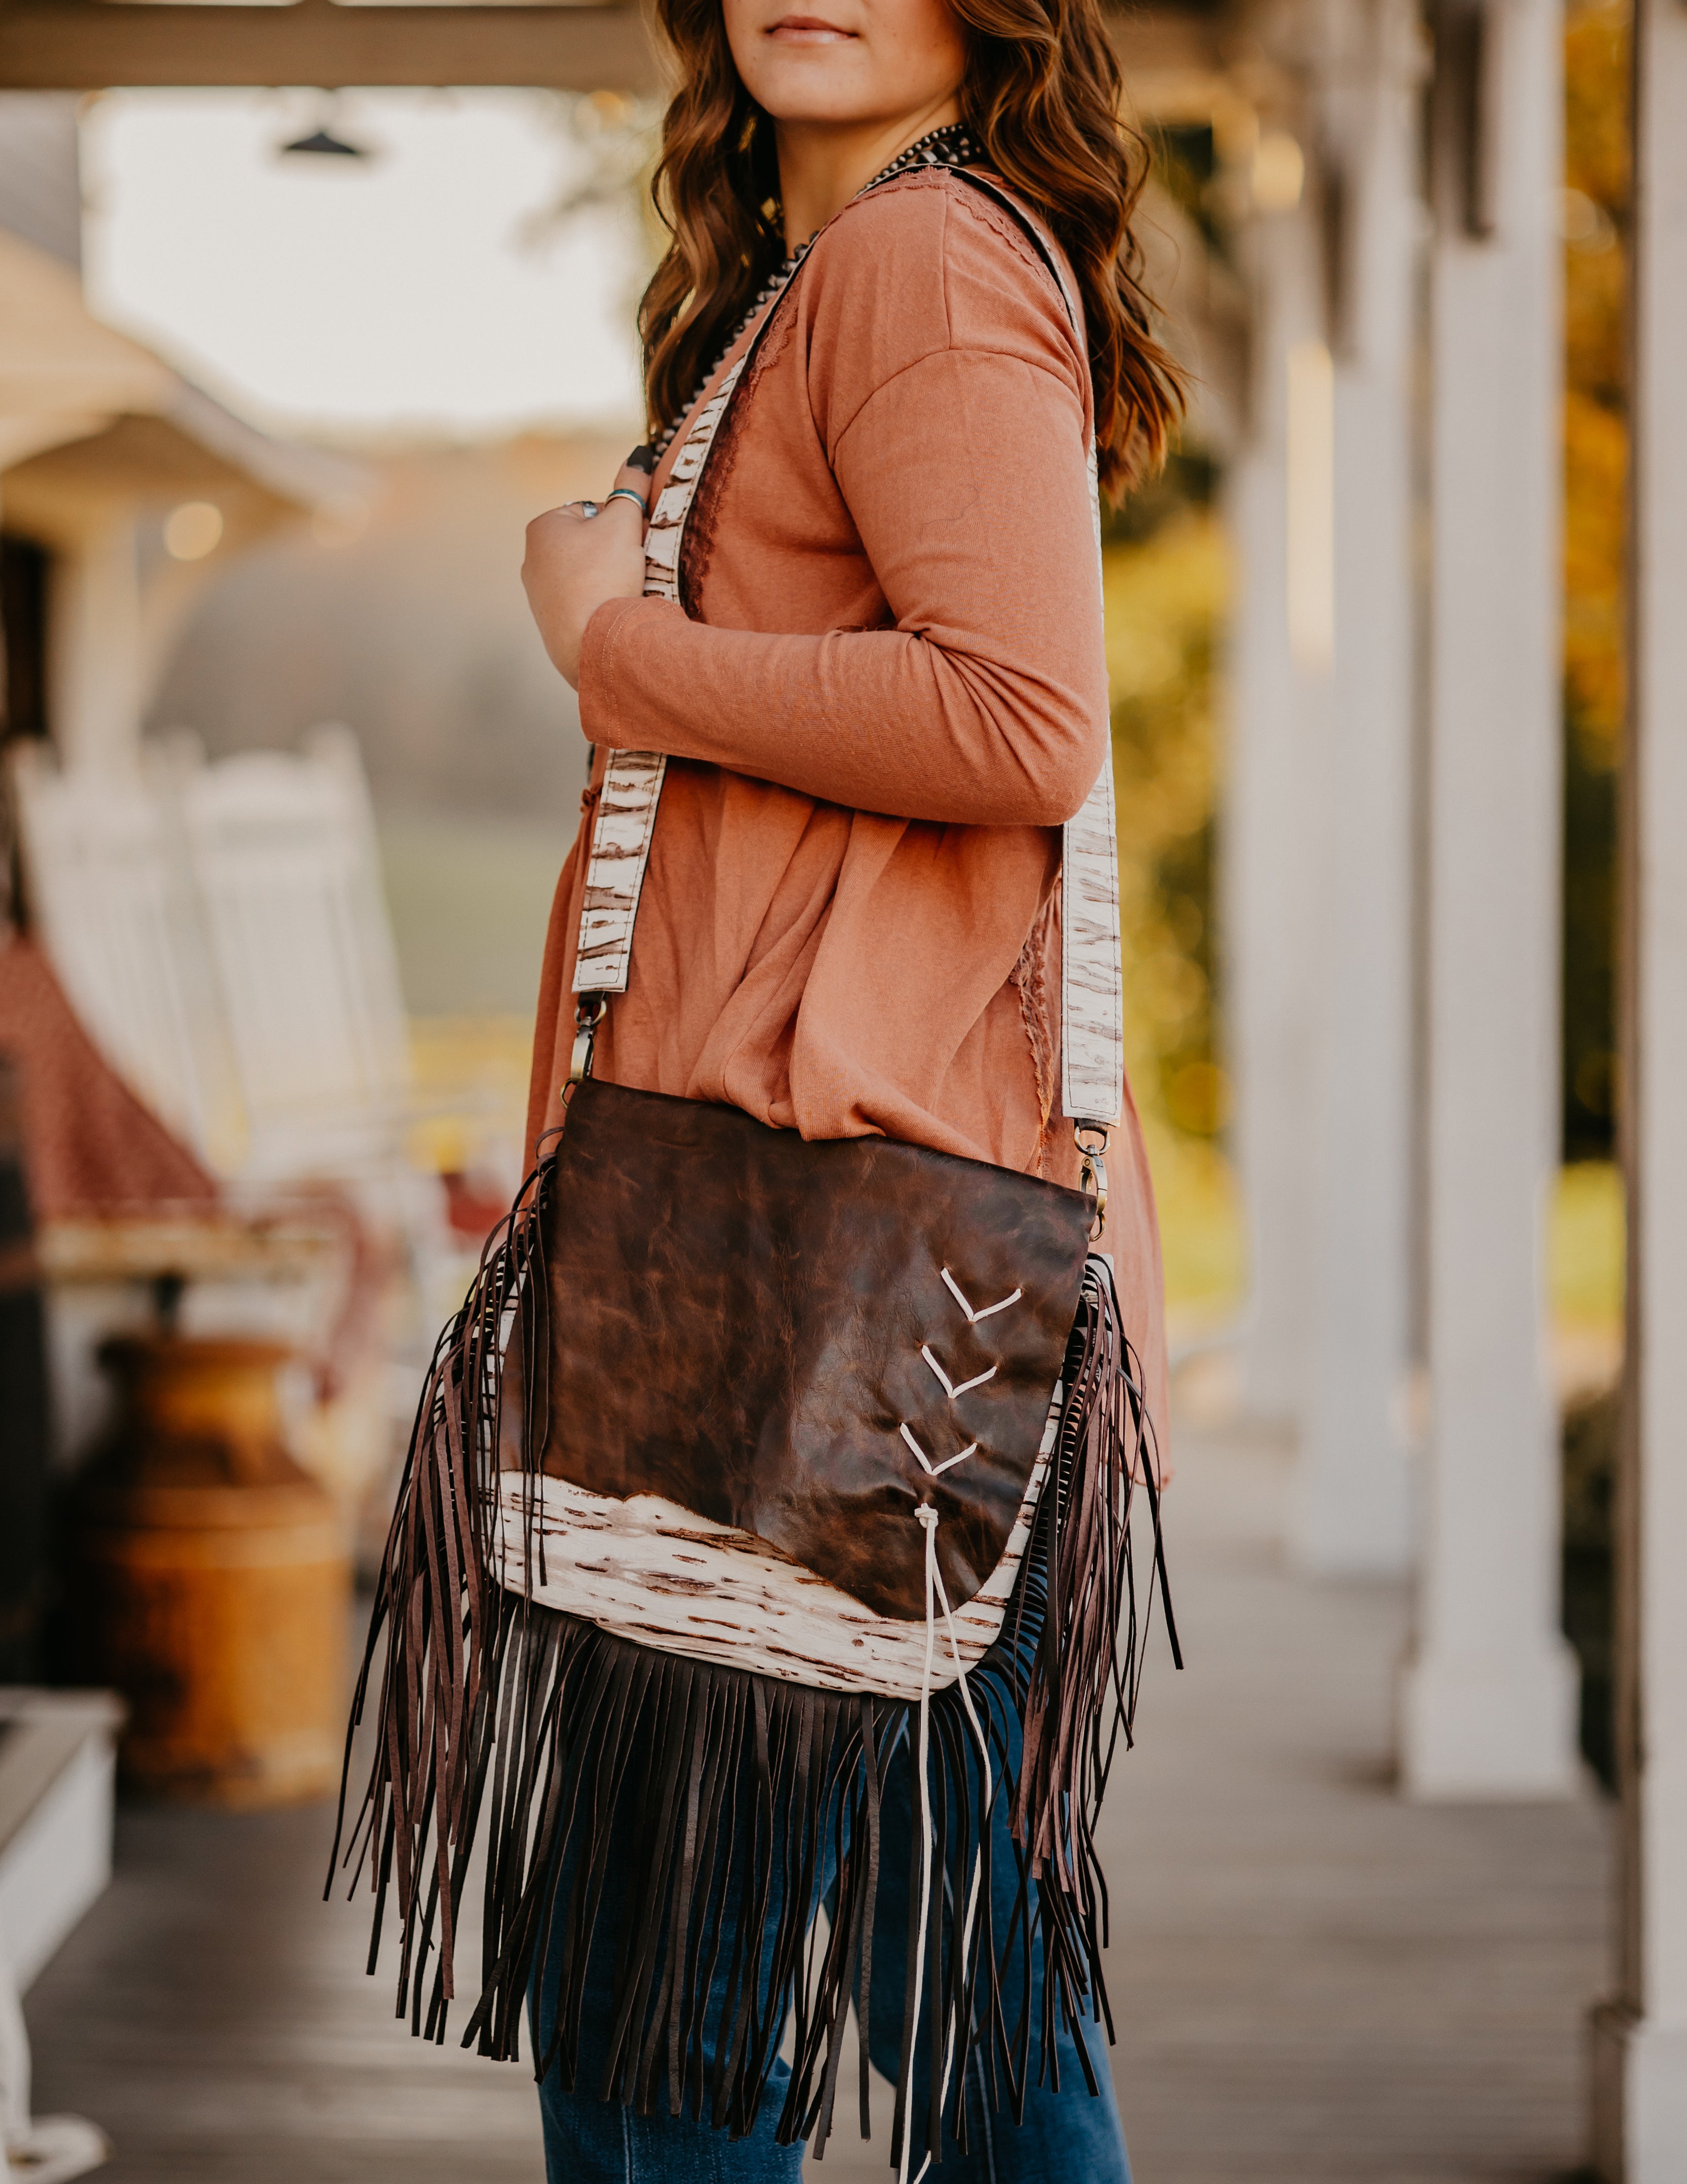 P & G Collection Cowhide Leather Fringe Crossbody Handbag With Concho And  Gator Print: Chicks Discount Saddlery